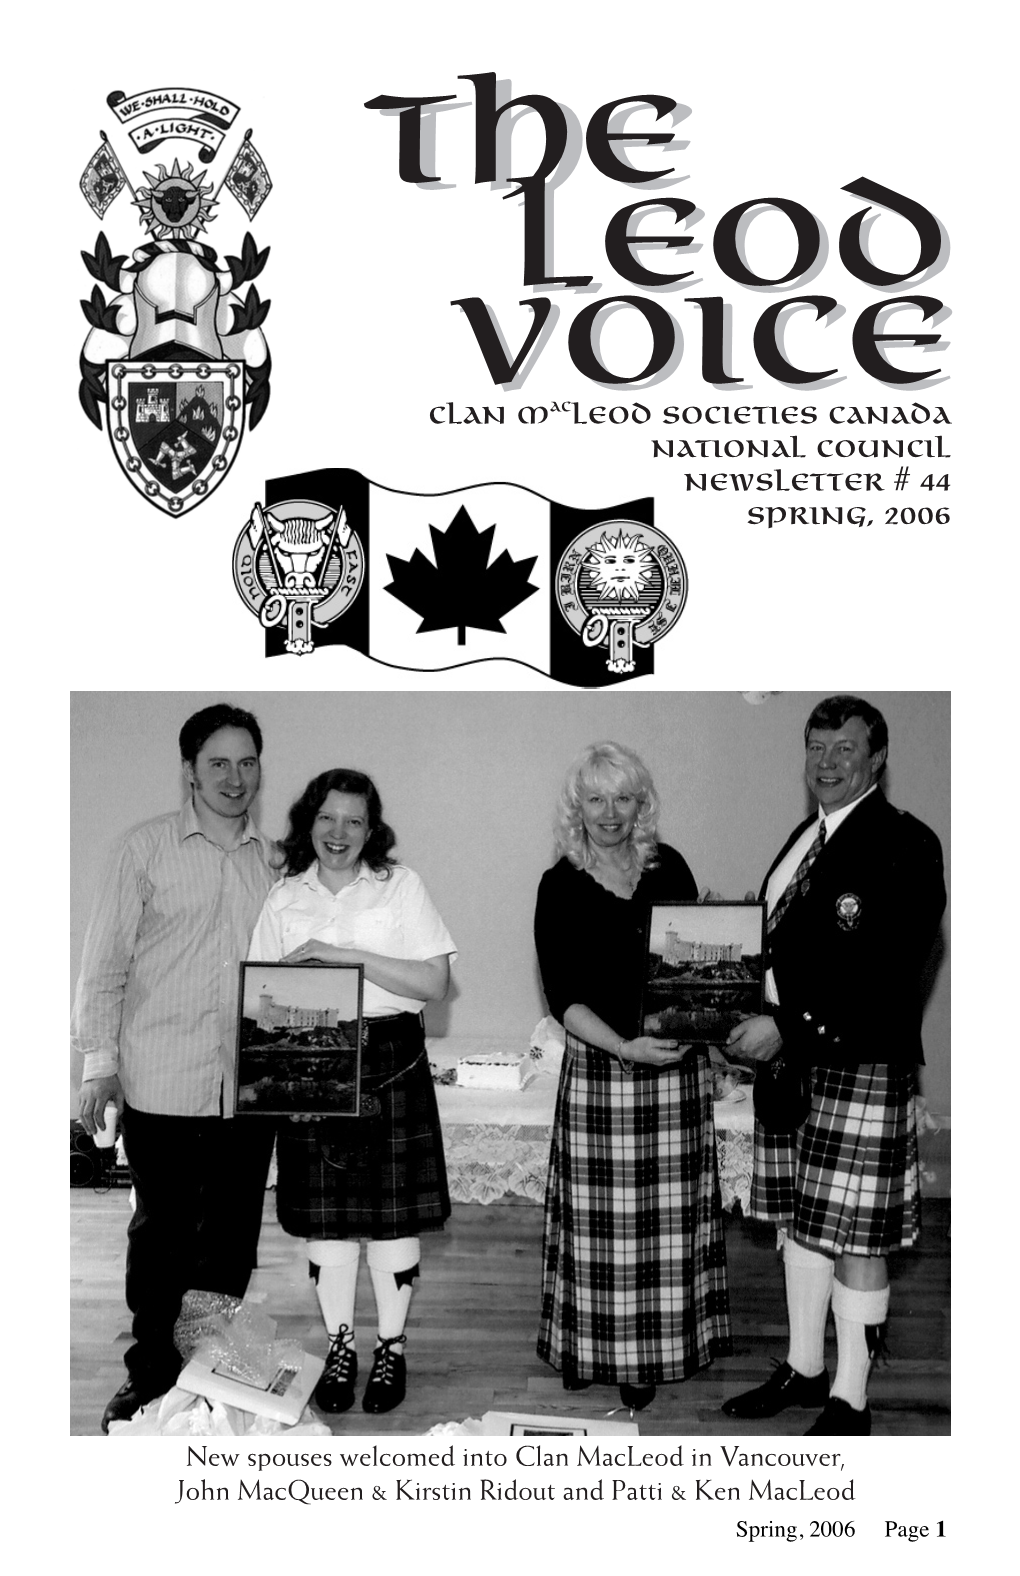 Clan Macleod Magazine; Leonard Mcleod - President of CMS Republic of South Africa and John Davidson Kelly - As Above